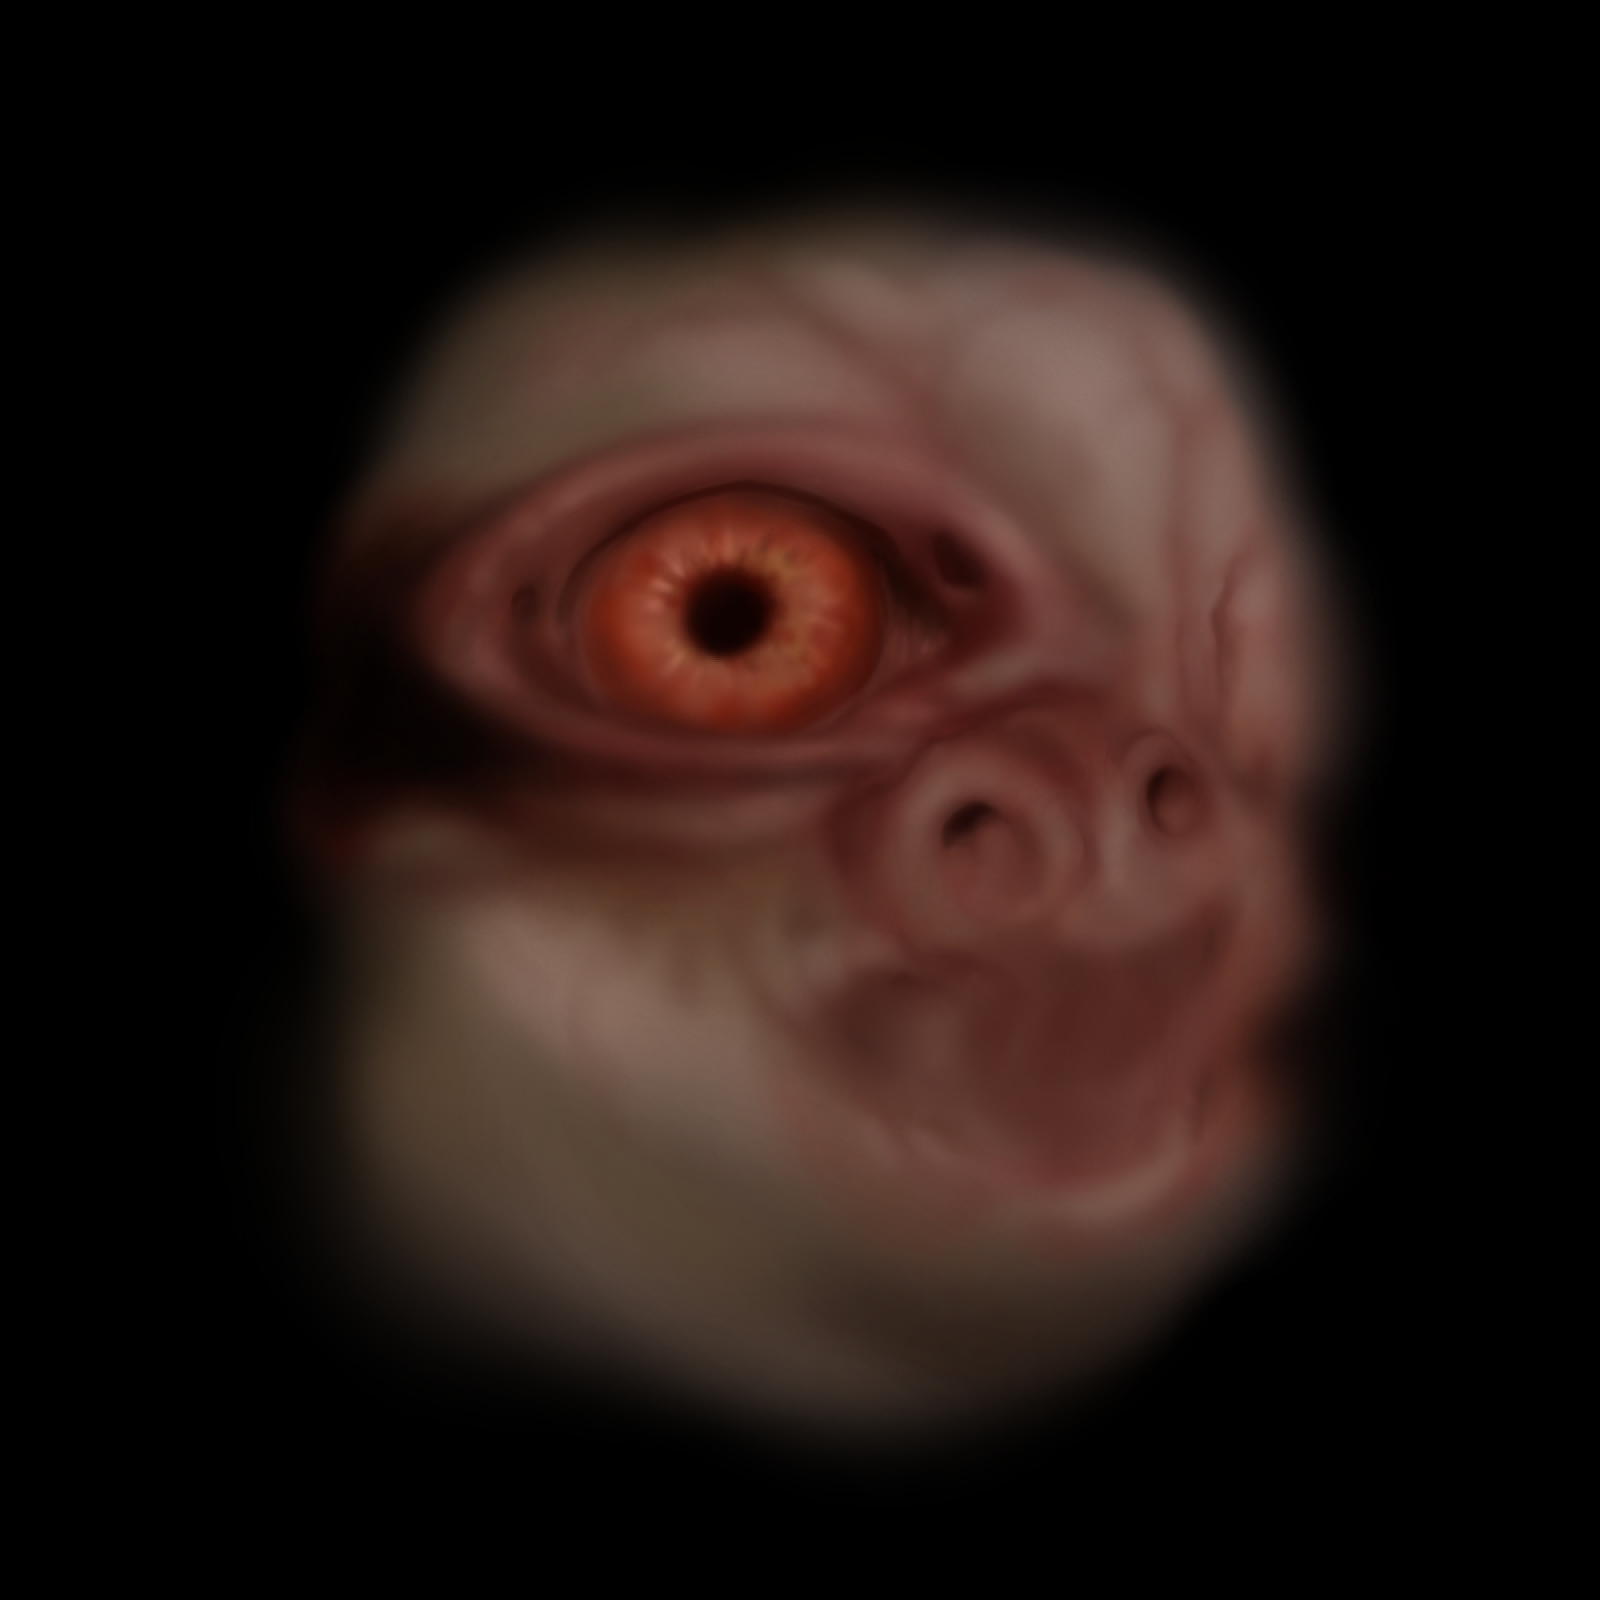 Digital painting on a dark background with a blurry face in the middle. It's a strange face with skin over its open mouth, and an orange eye that looks like the pupil is almost a donut, not part of an eyeball